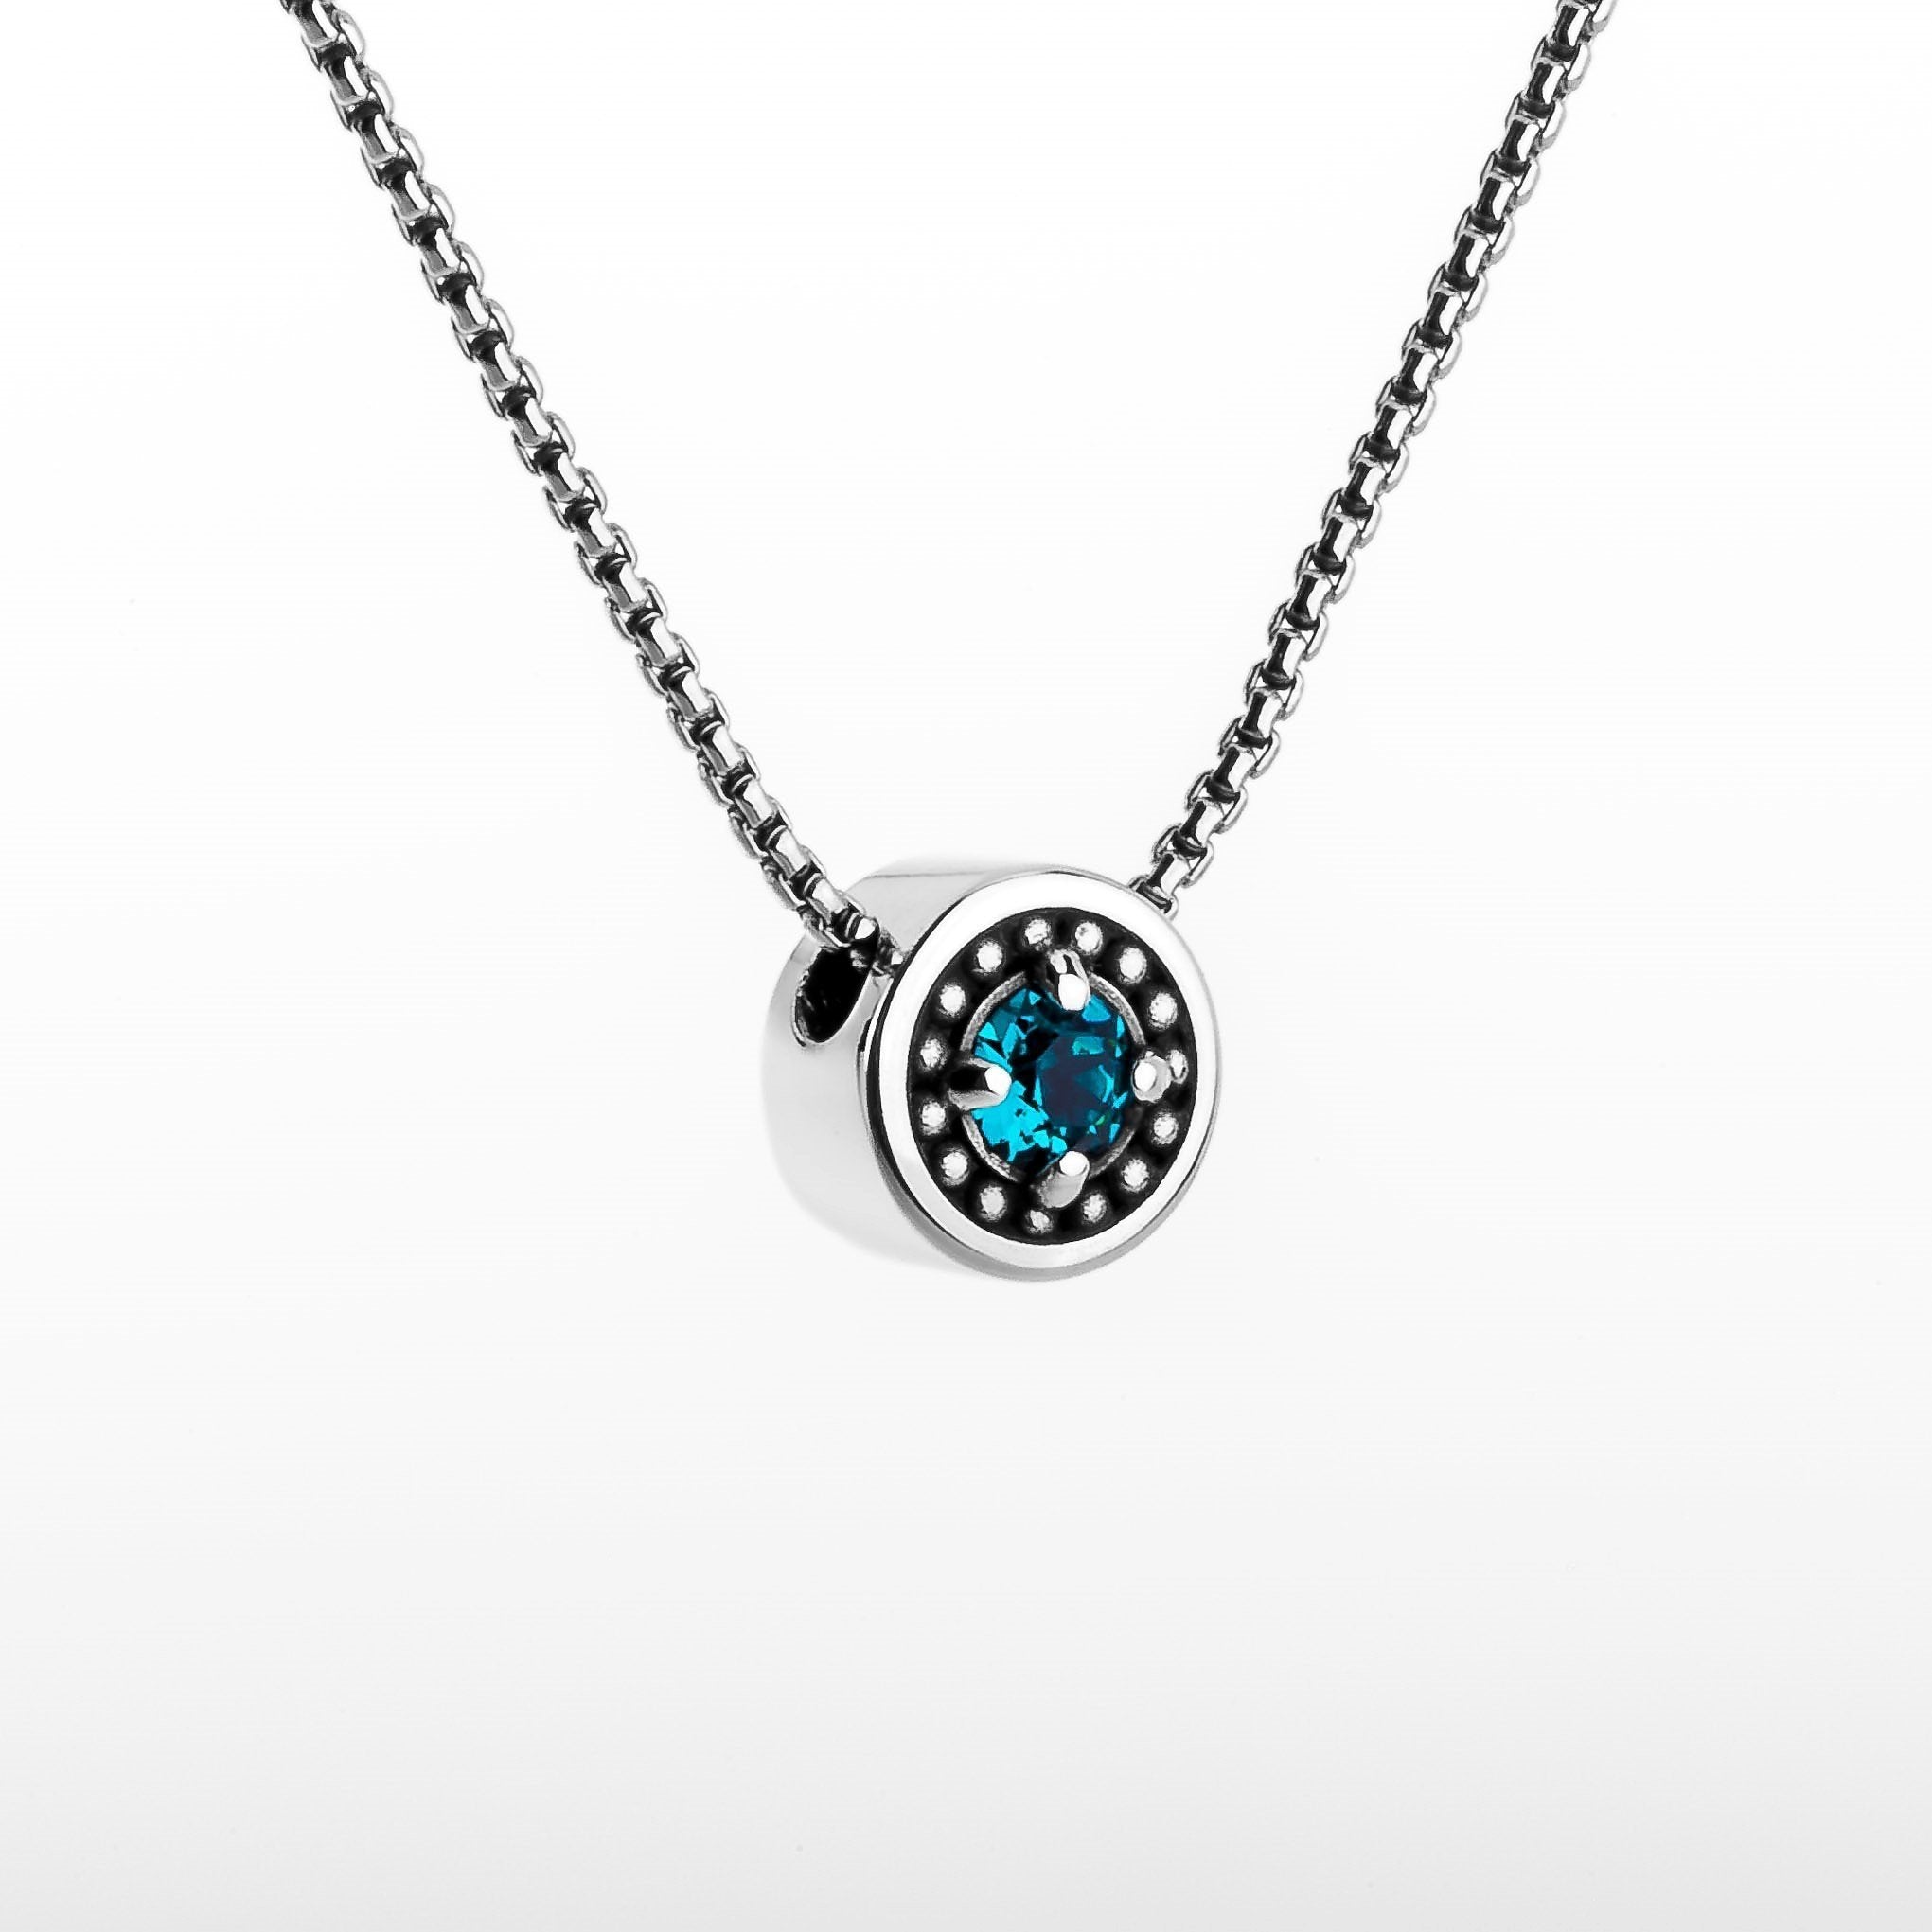 December Birthstone Necklace - The Generations "Petite"